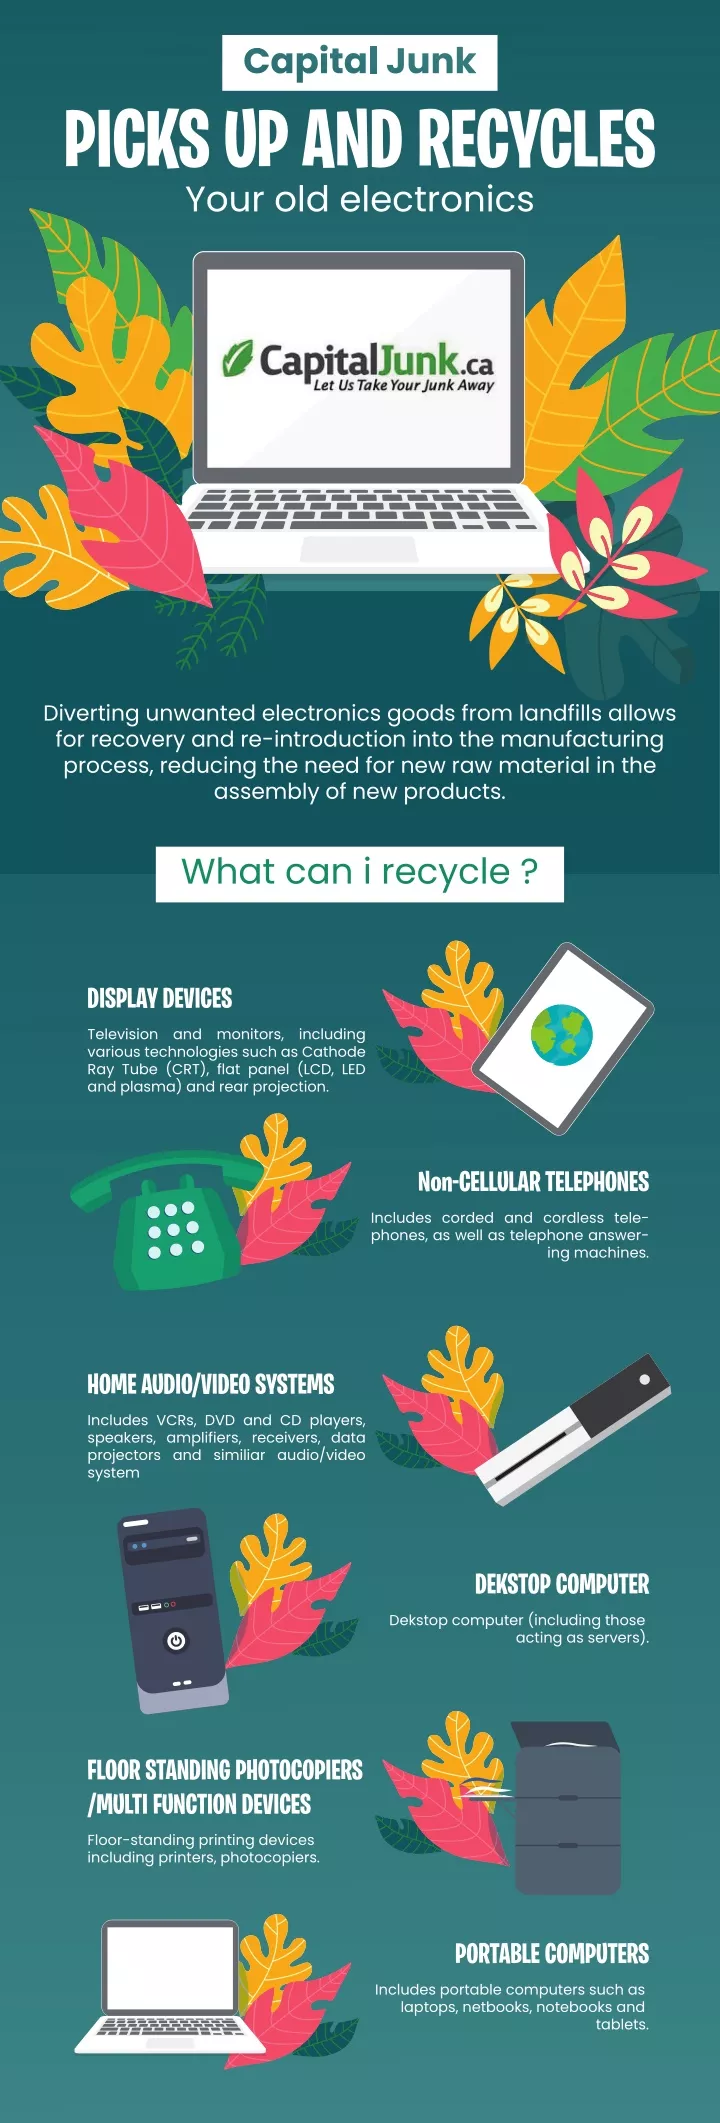 picks up and recycles your old electronics